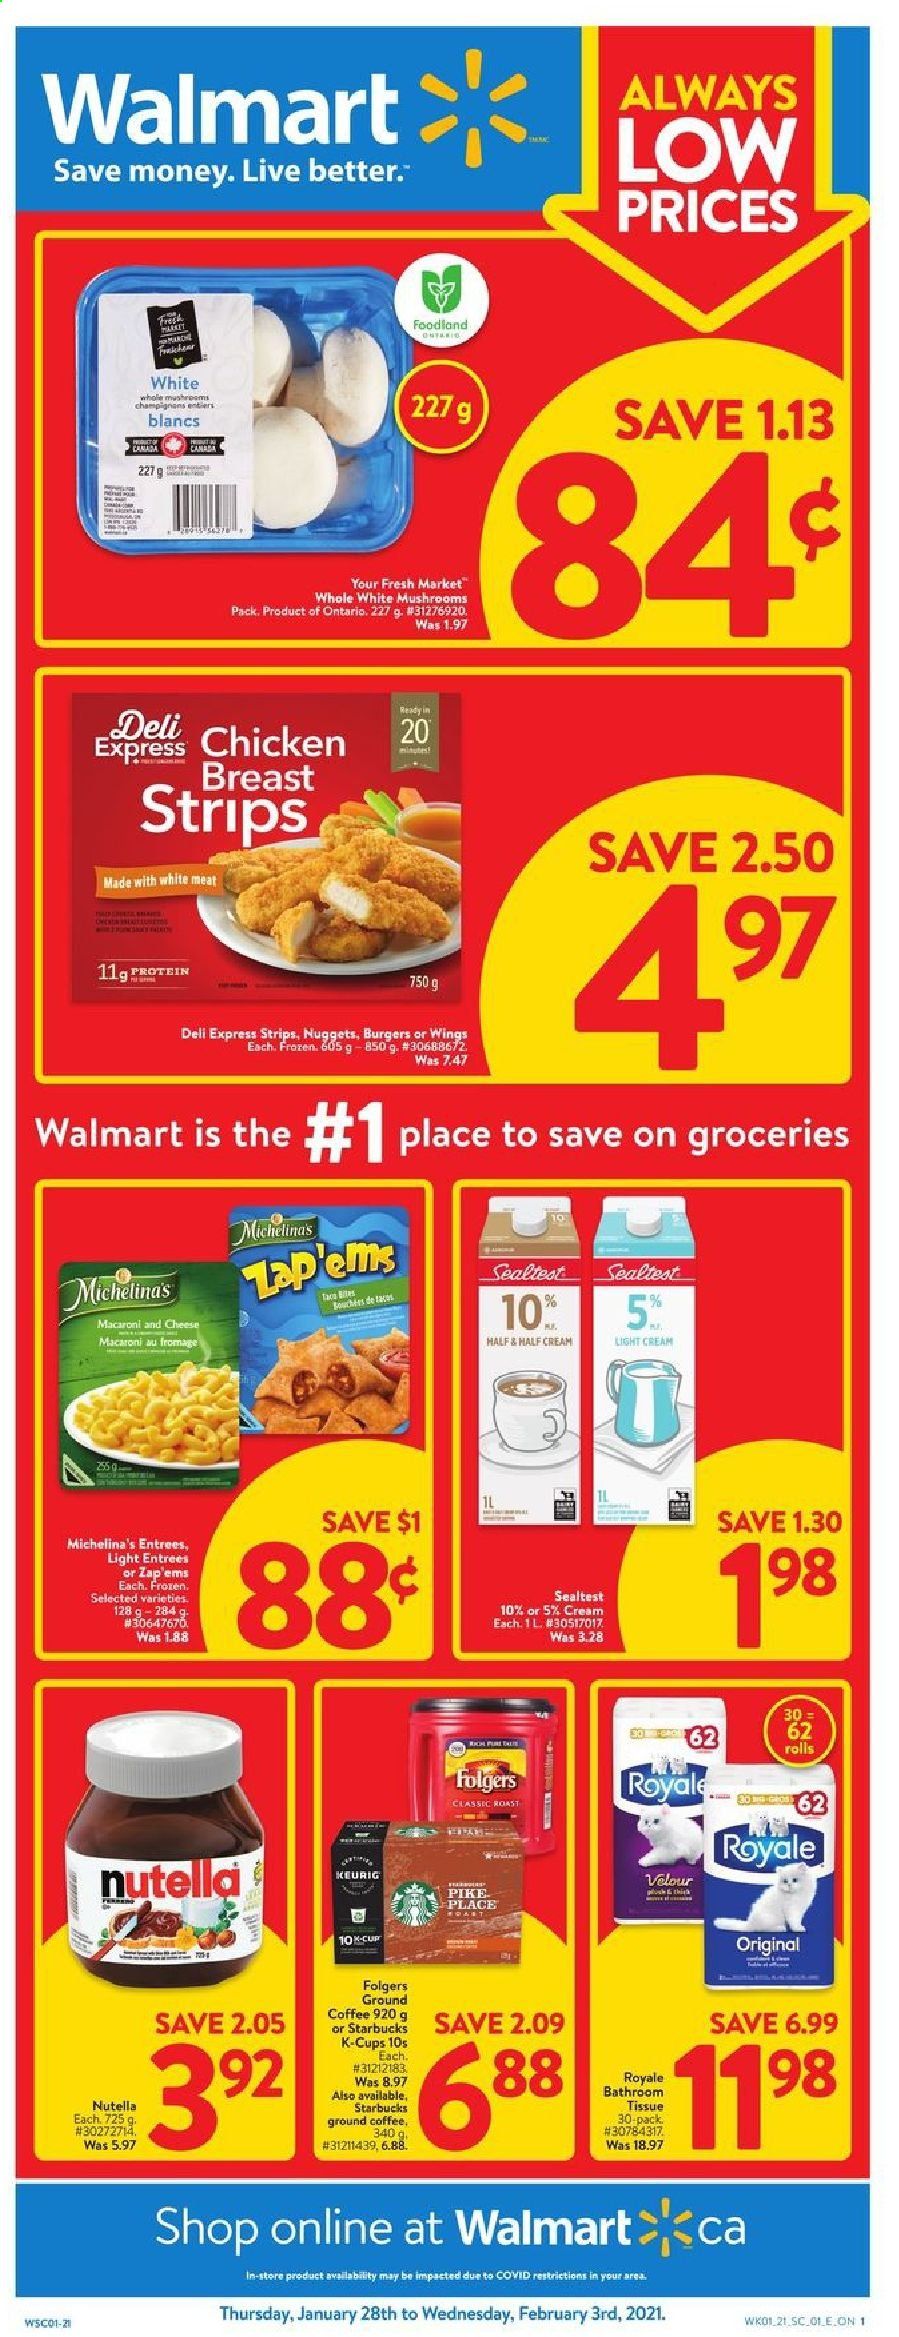 thumbnail - Walmart Flyer - January 28, 2021 - February 03, 2021 - Sales products - mushrooms, macaroni & cheese, nuggets, hamburger, strips, coffee, Folgers, ground coffee, coffee capsules, Starbucks, K-Cups, Keurig, chicken breasts, chicken, bath tissue, Nutella. Page 1.